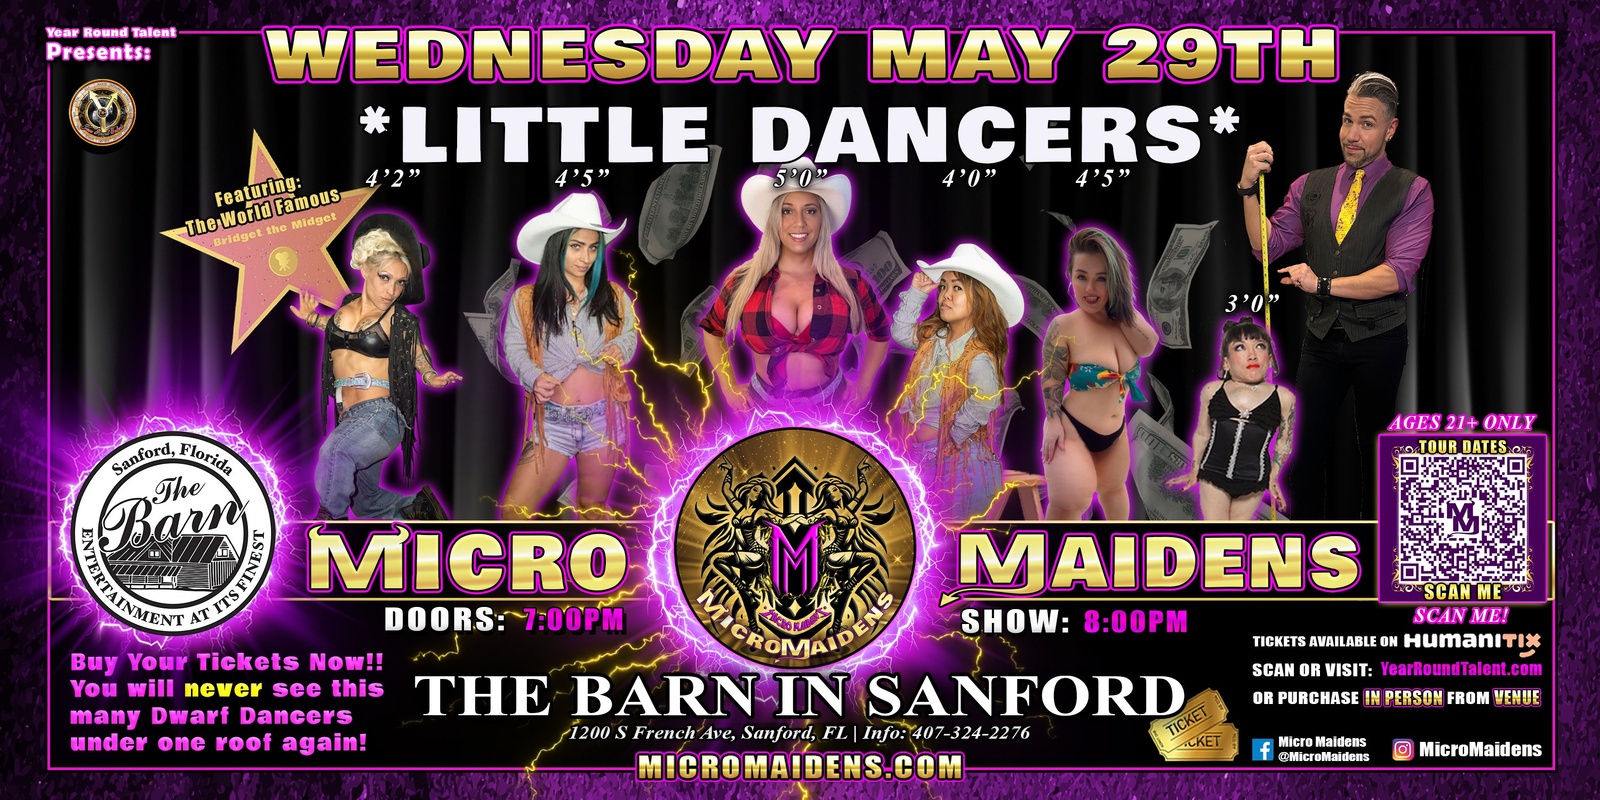 Banner image for Sanford, FL - Micro Maidens: The Show "Must Be This Tall to Ride!"